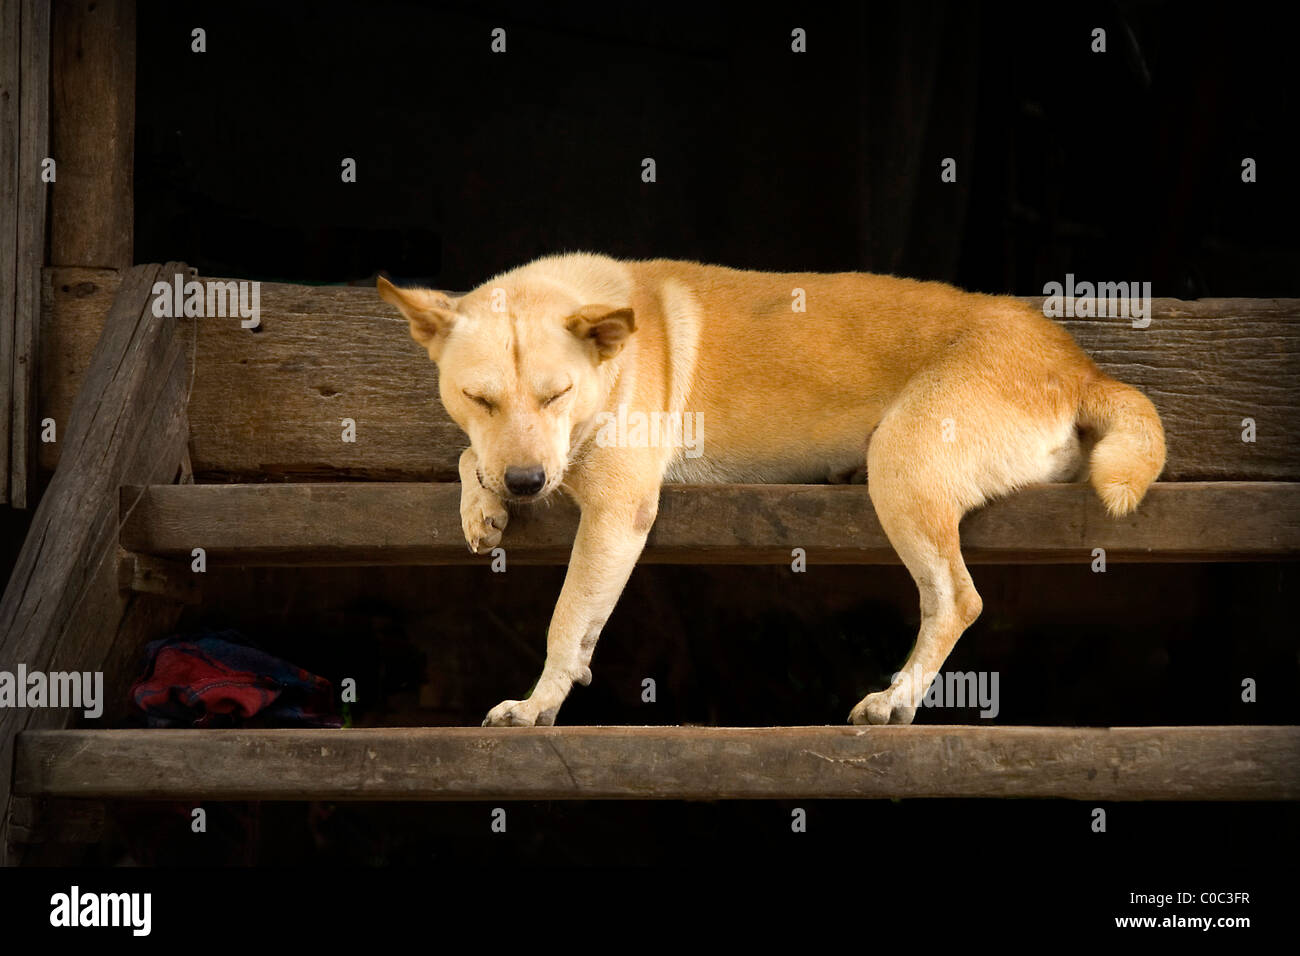 Resting village dog on stairs Stock Photo